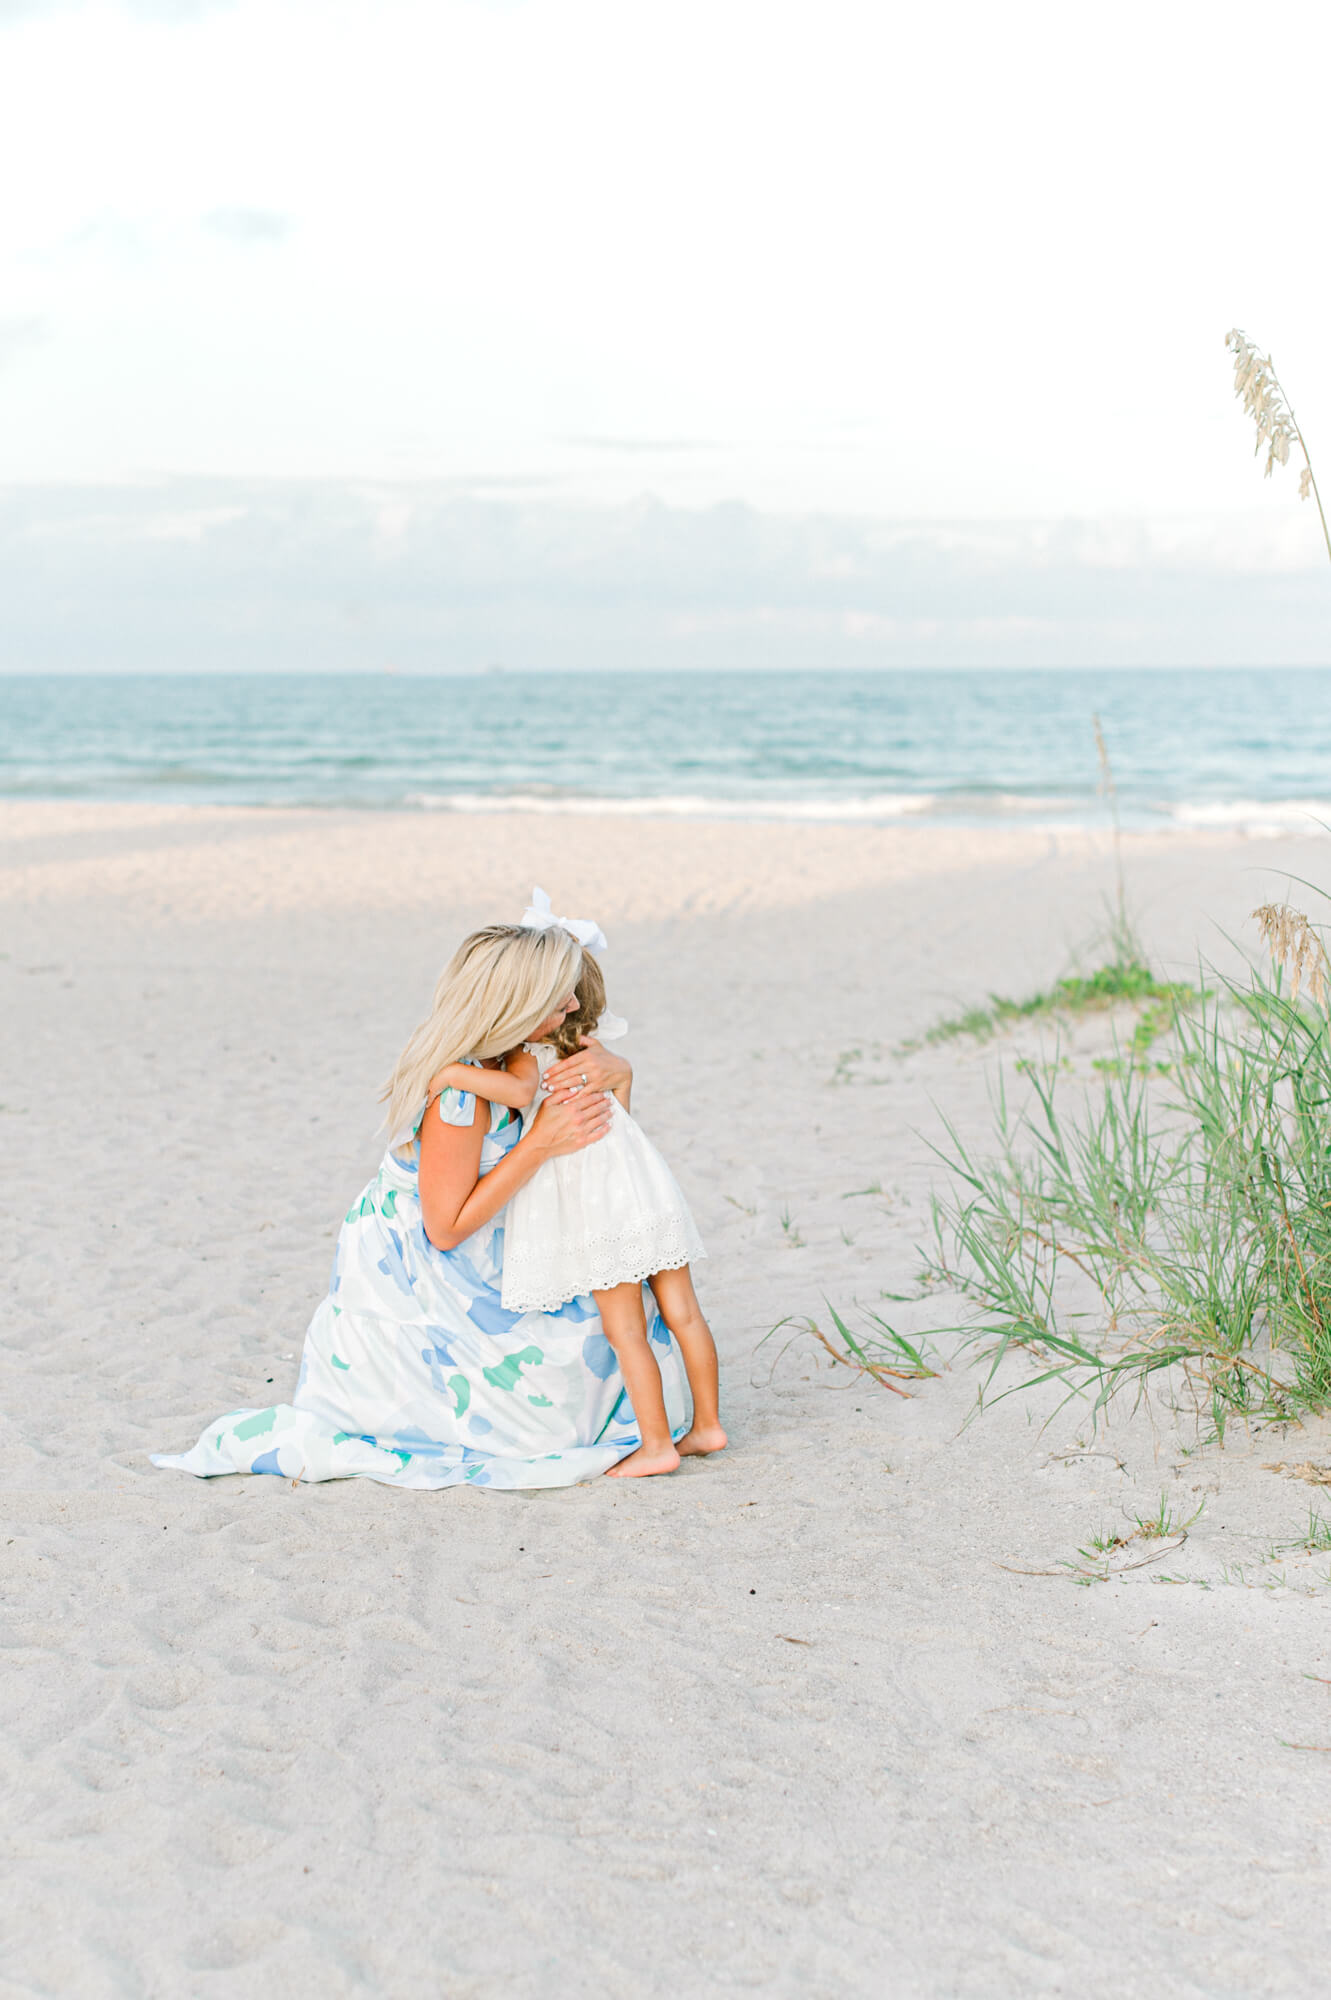 Mom hugging her daughter near the dunes with the beautiful beach landscape in the background